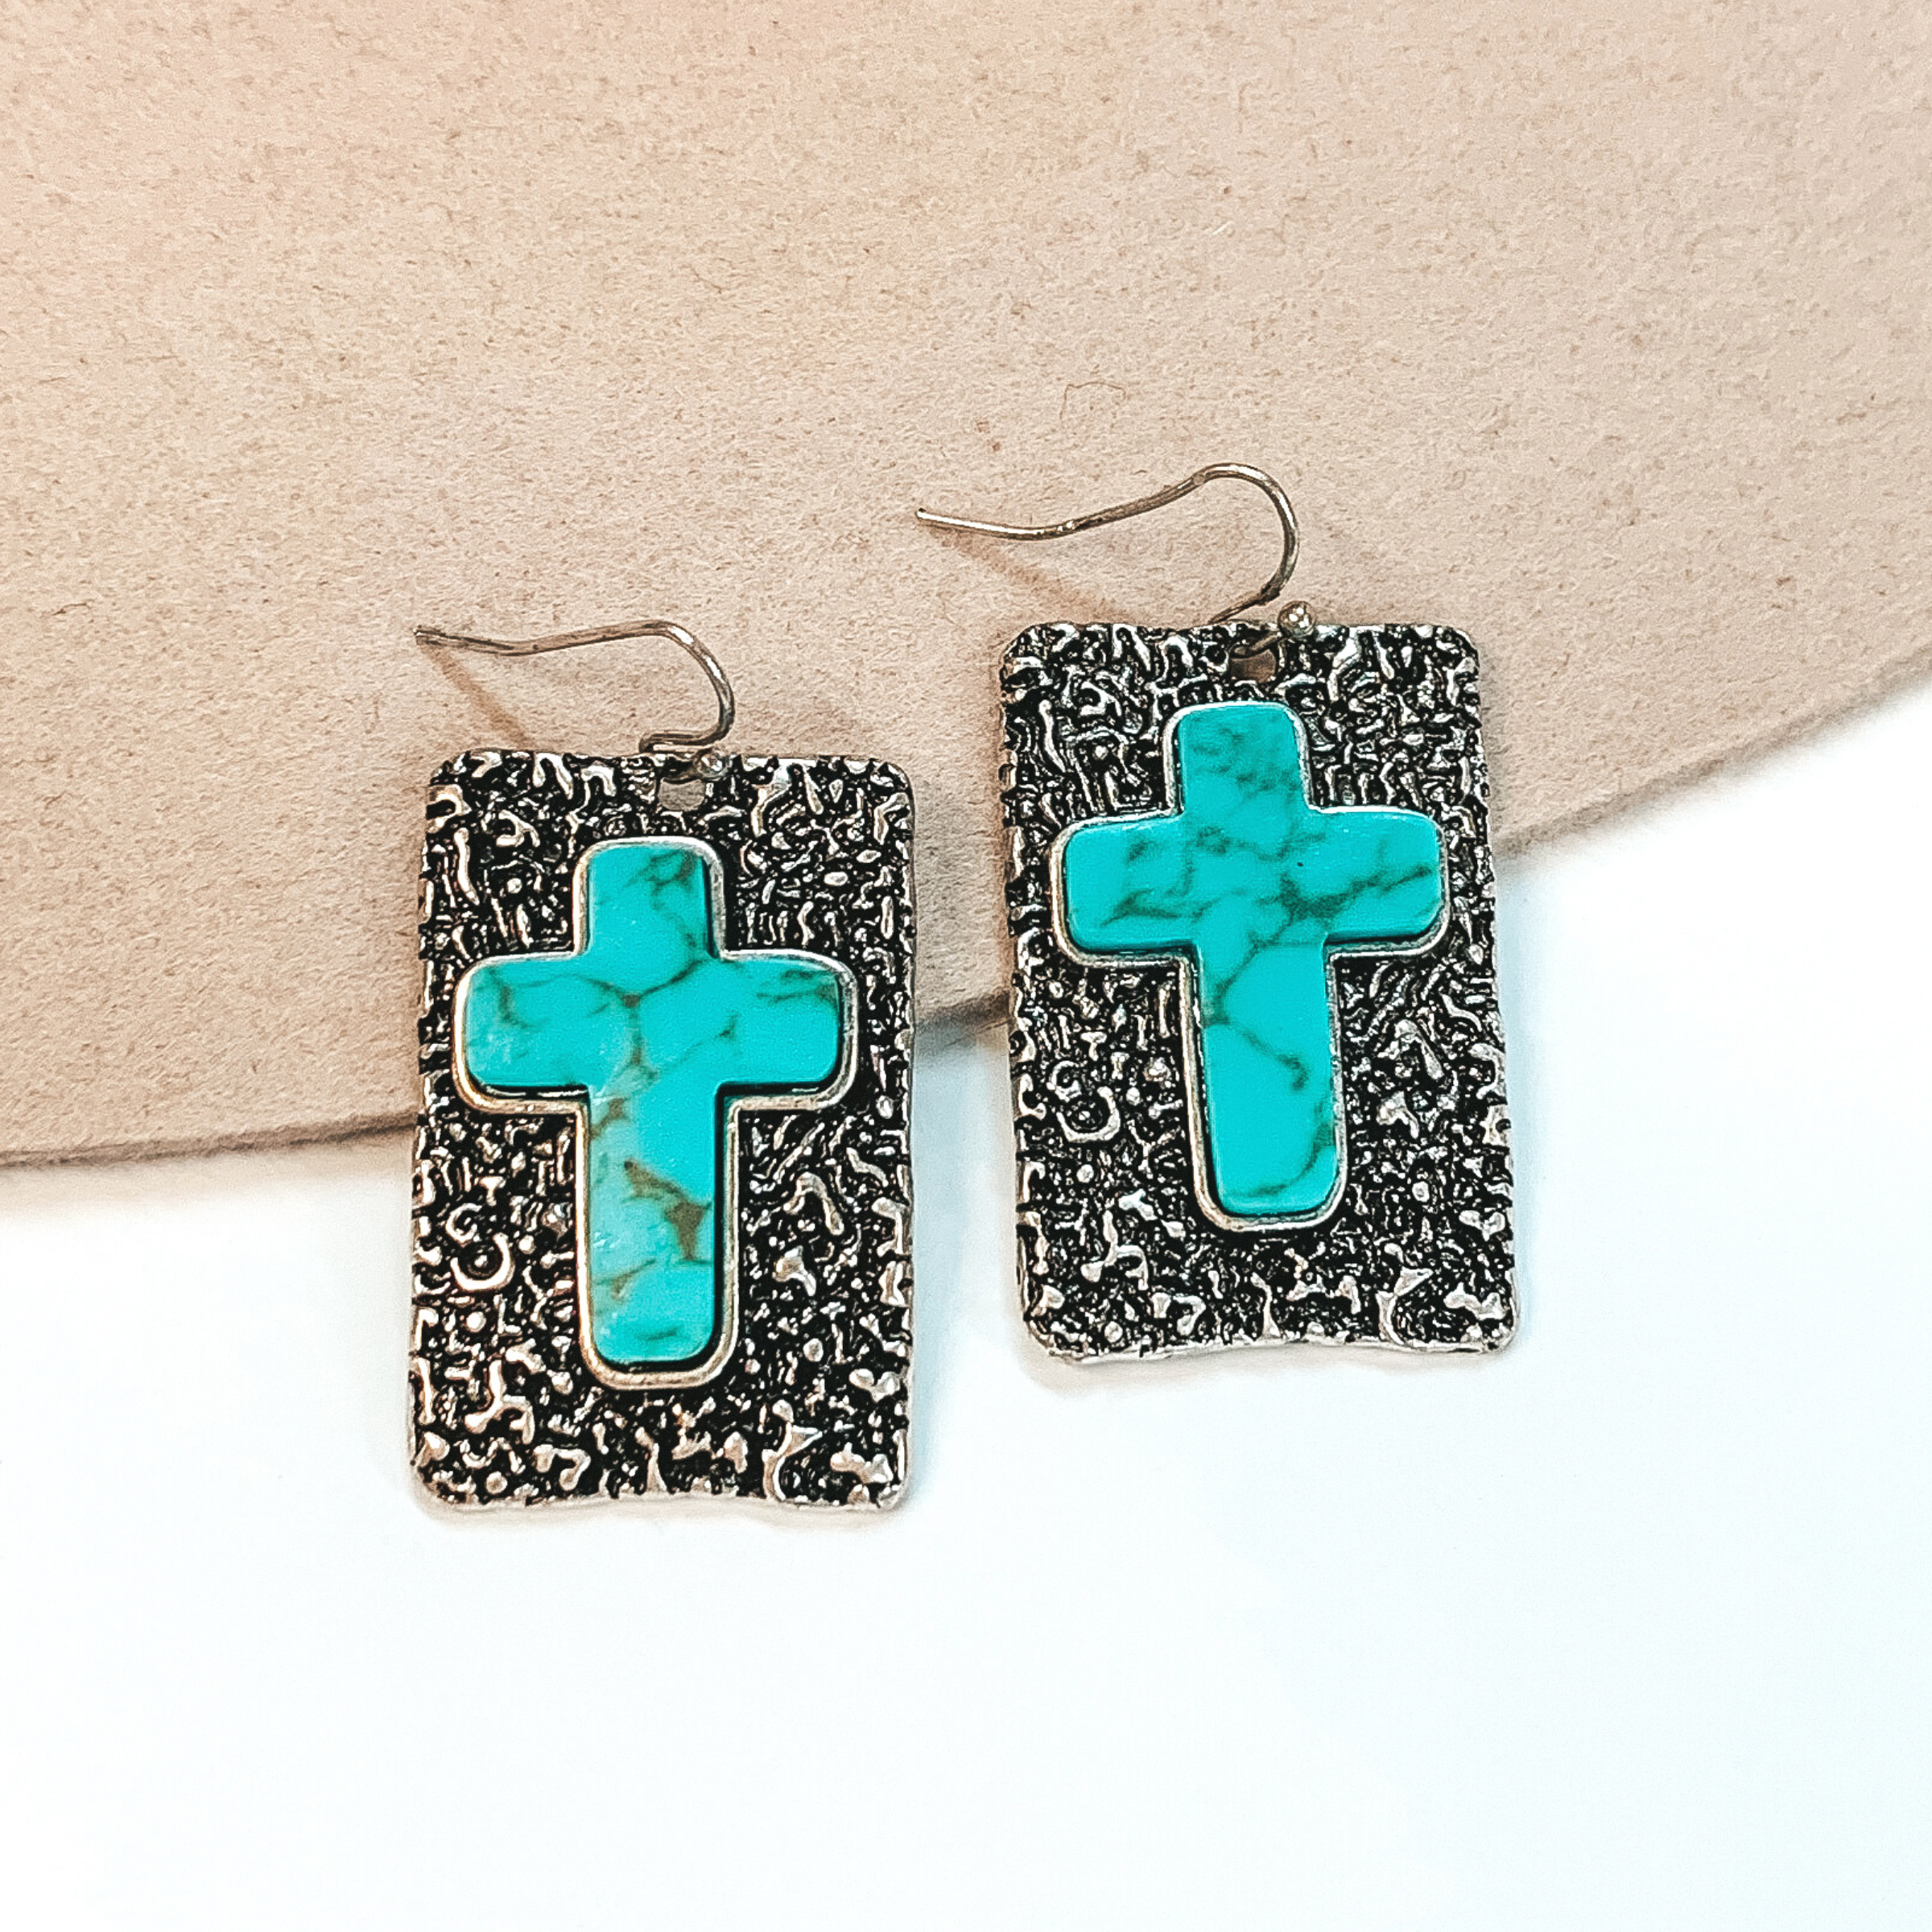 Fish hook earrings with silver rectangle pendant that has engraving detailing. In the center of the pendant, there is a turquoise cross stone. These earrings are pictured on a white and beige background. 